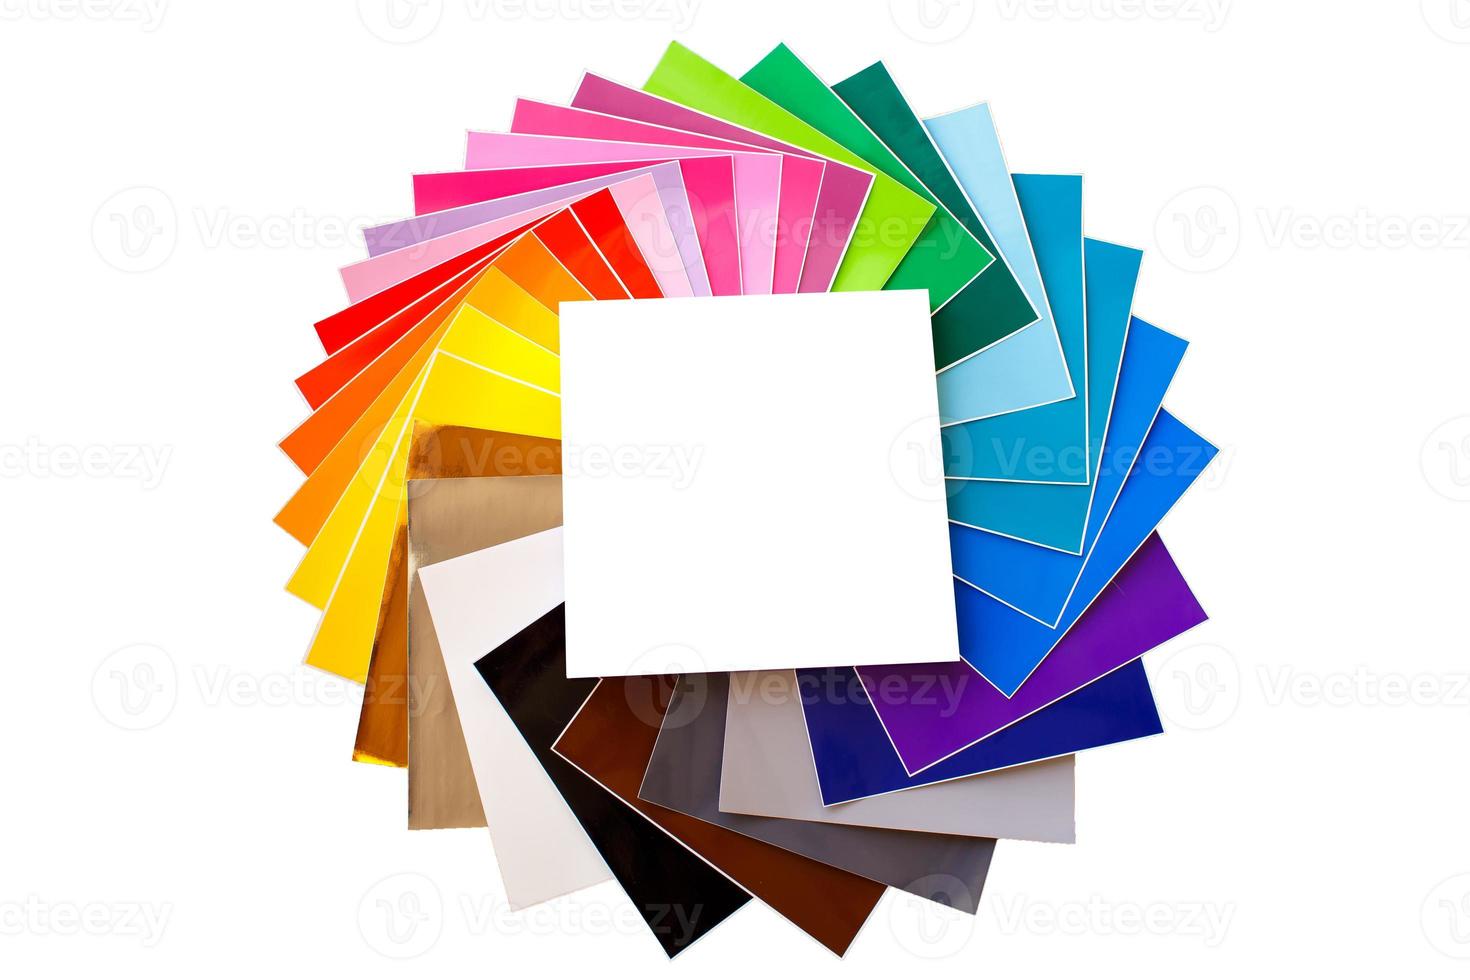 Twisted pile of colorful 12x12 sheets of adhesive paper with box photo